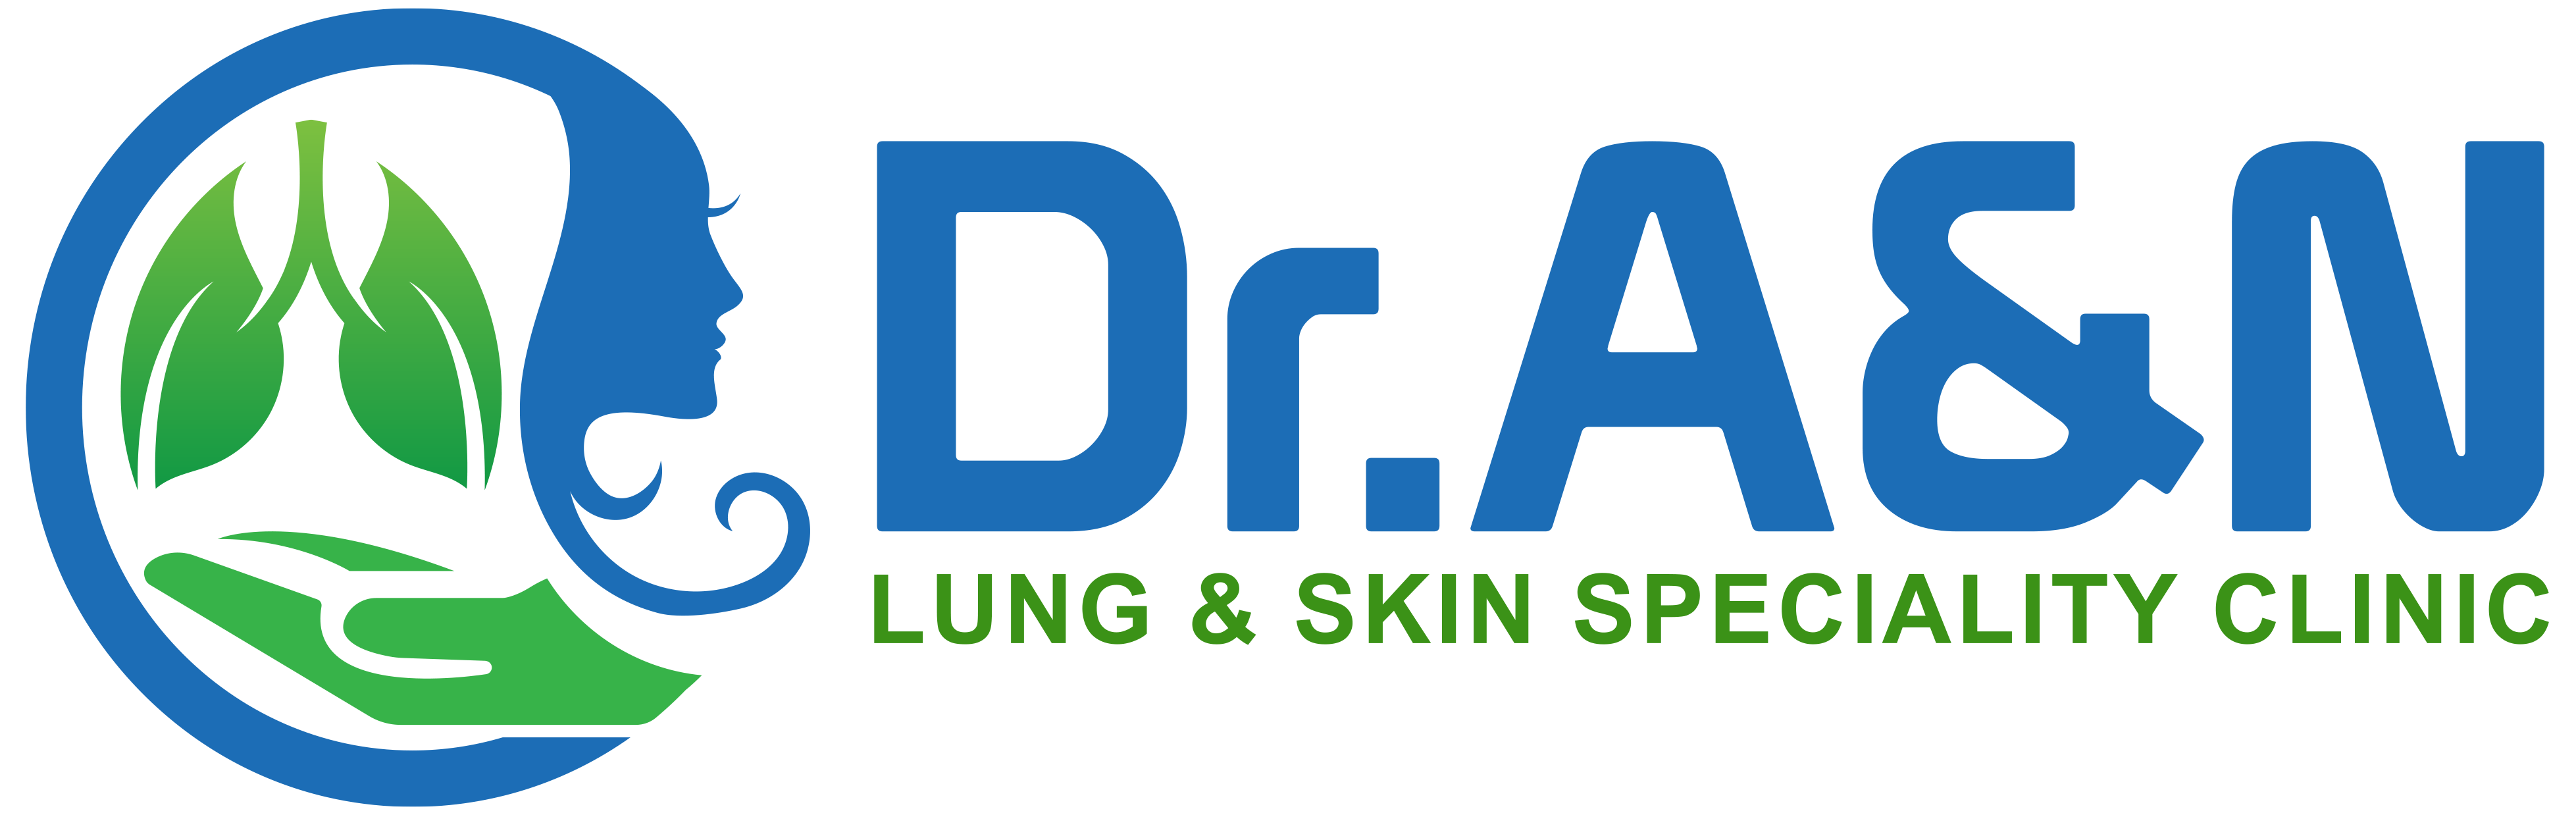 Dr A & N Lung and Skin Speciality Clinic